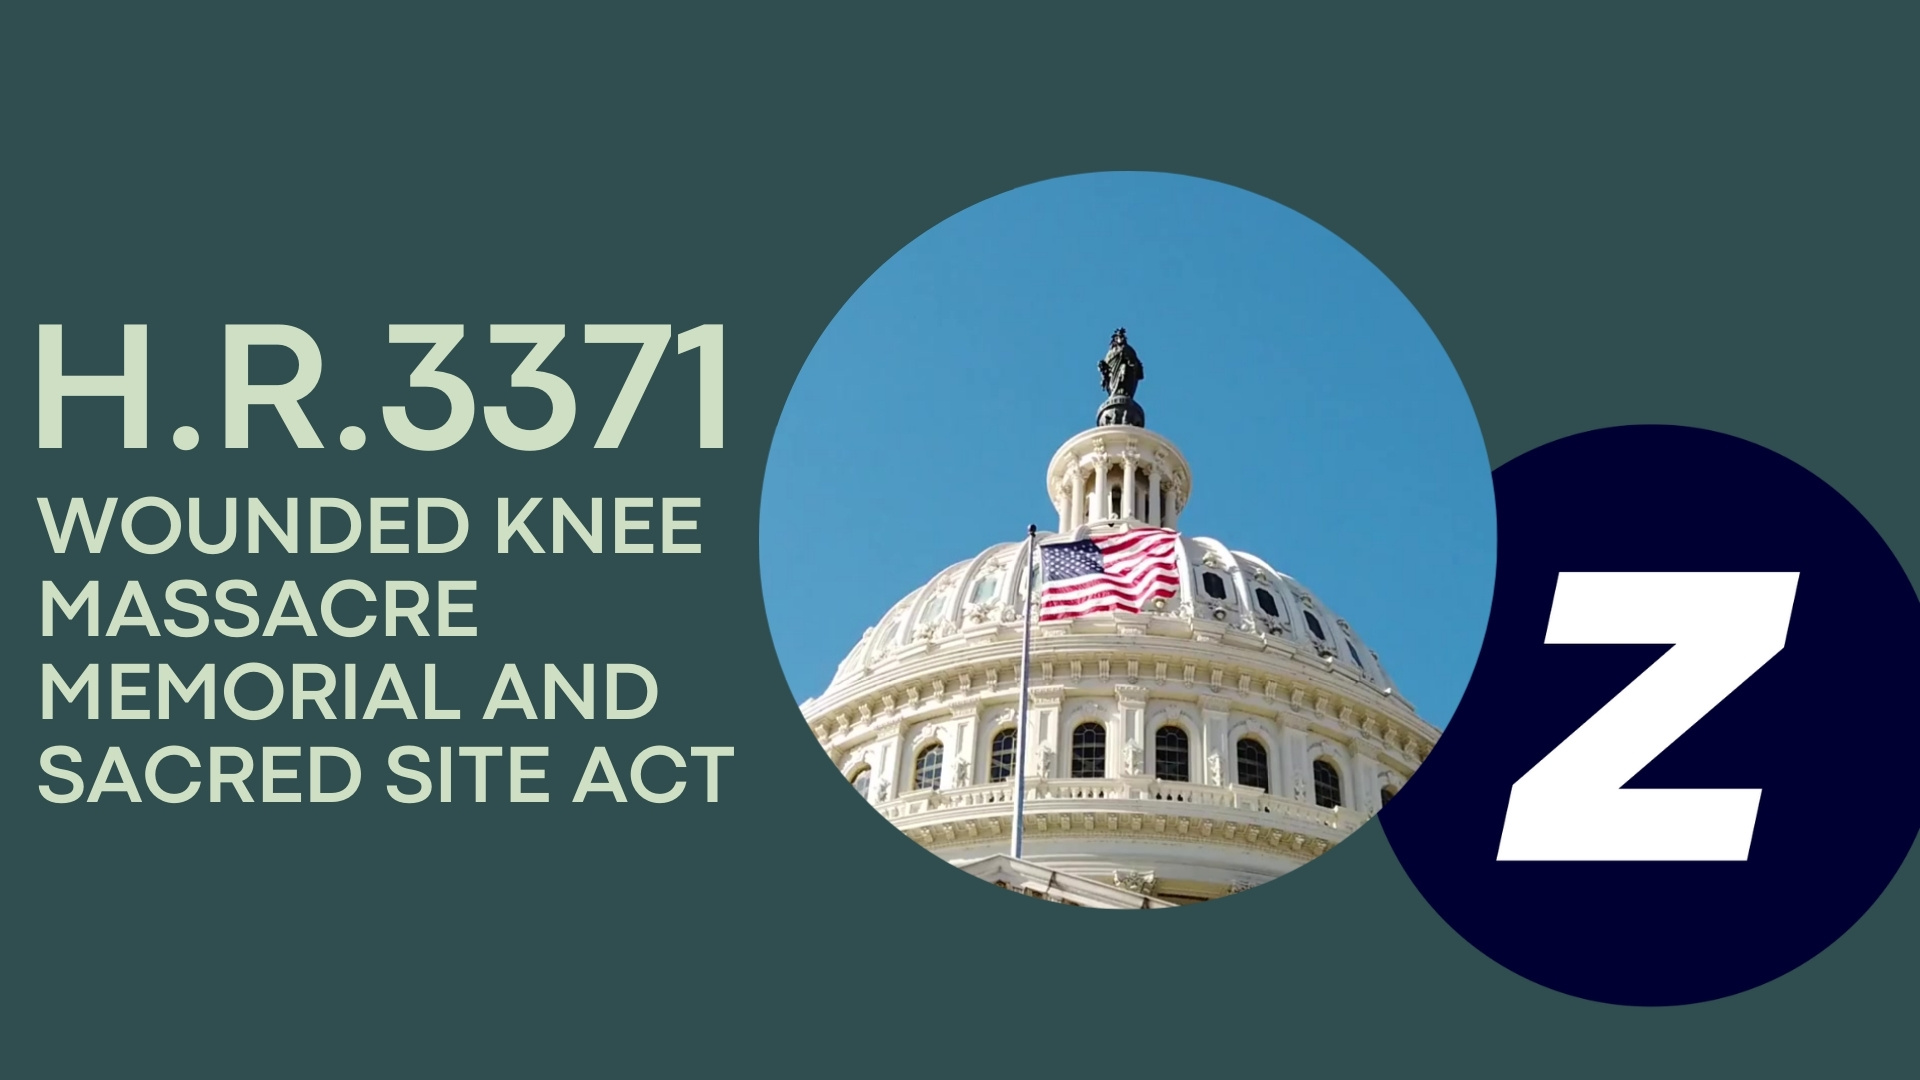 H.R.3371, Wounded Knee Massacre Memorial and Sacred Site Act